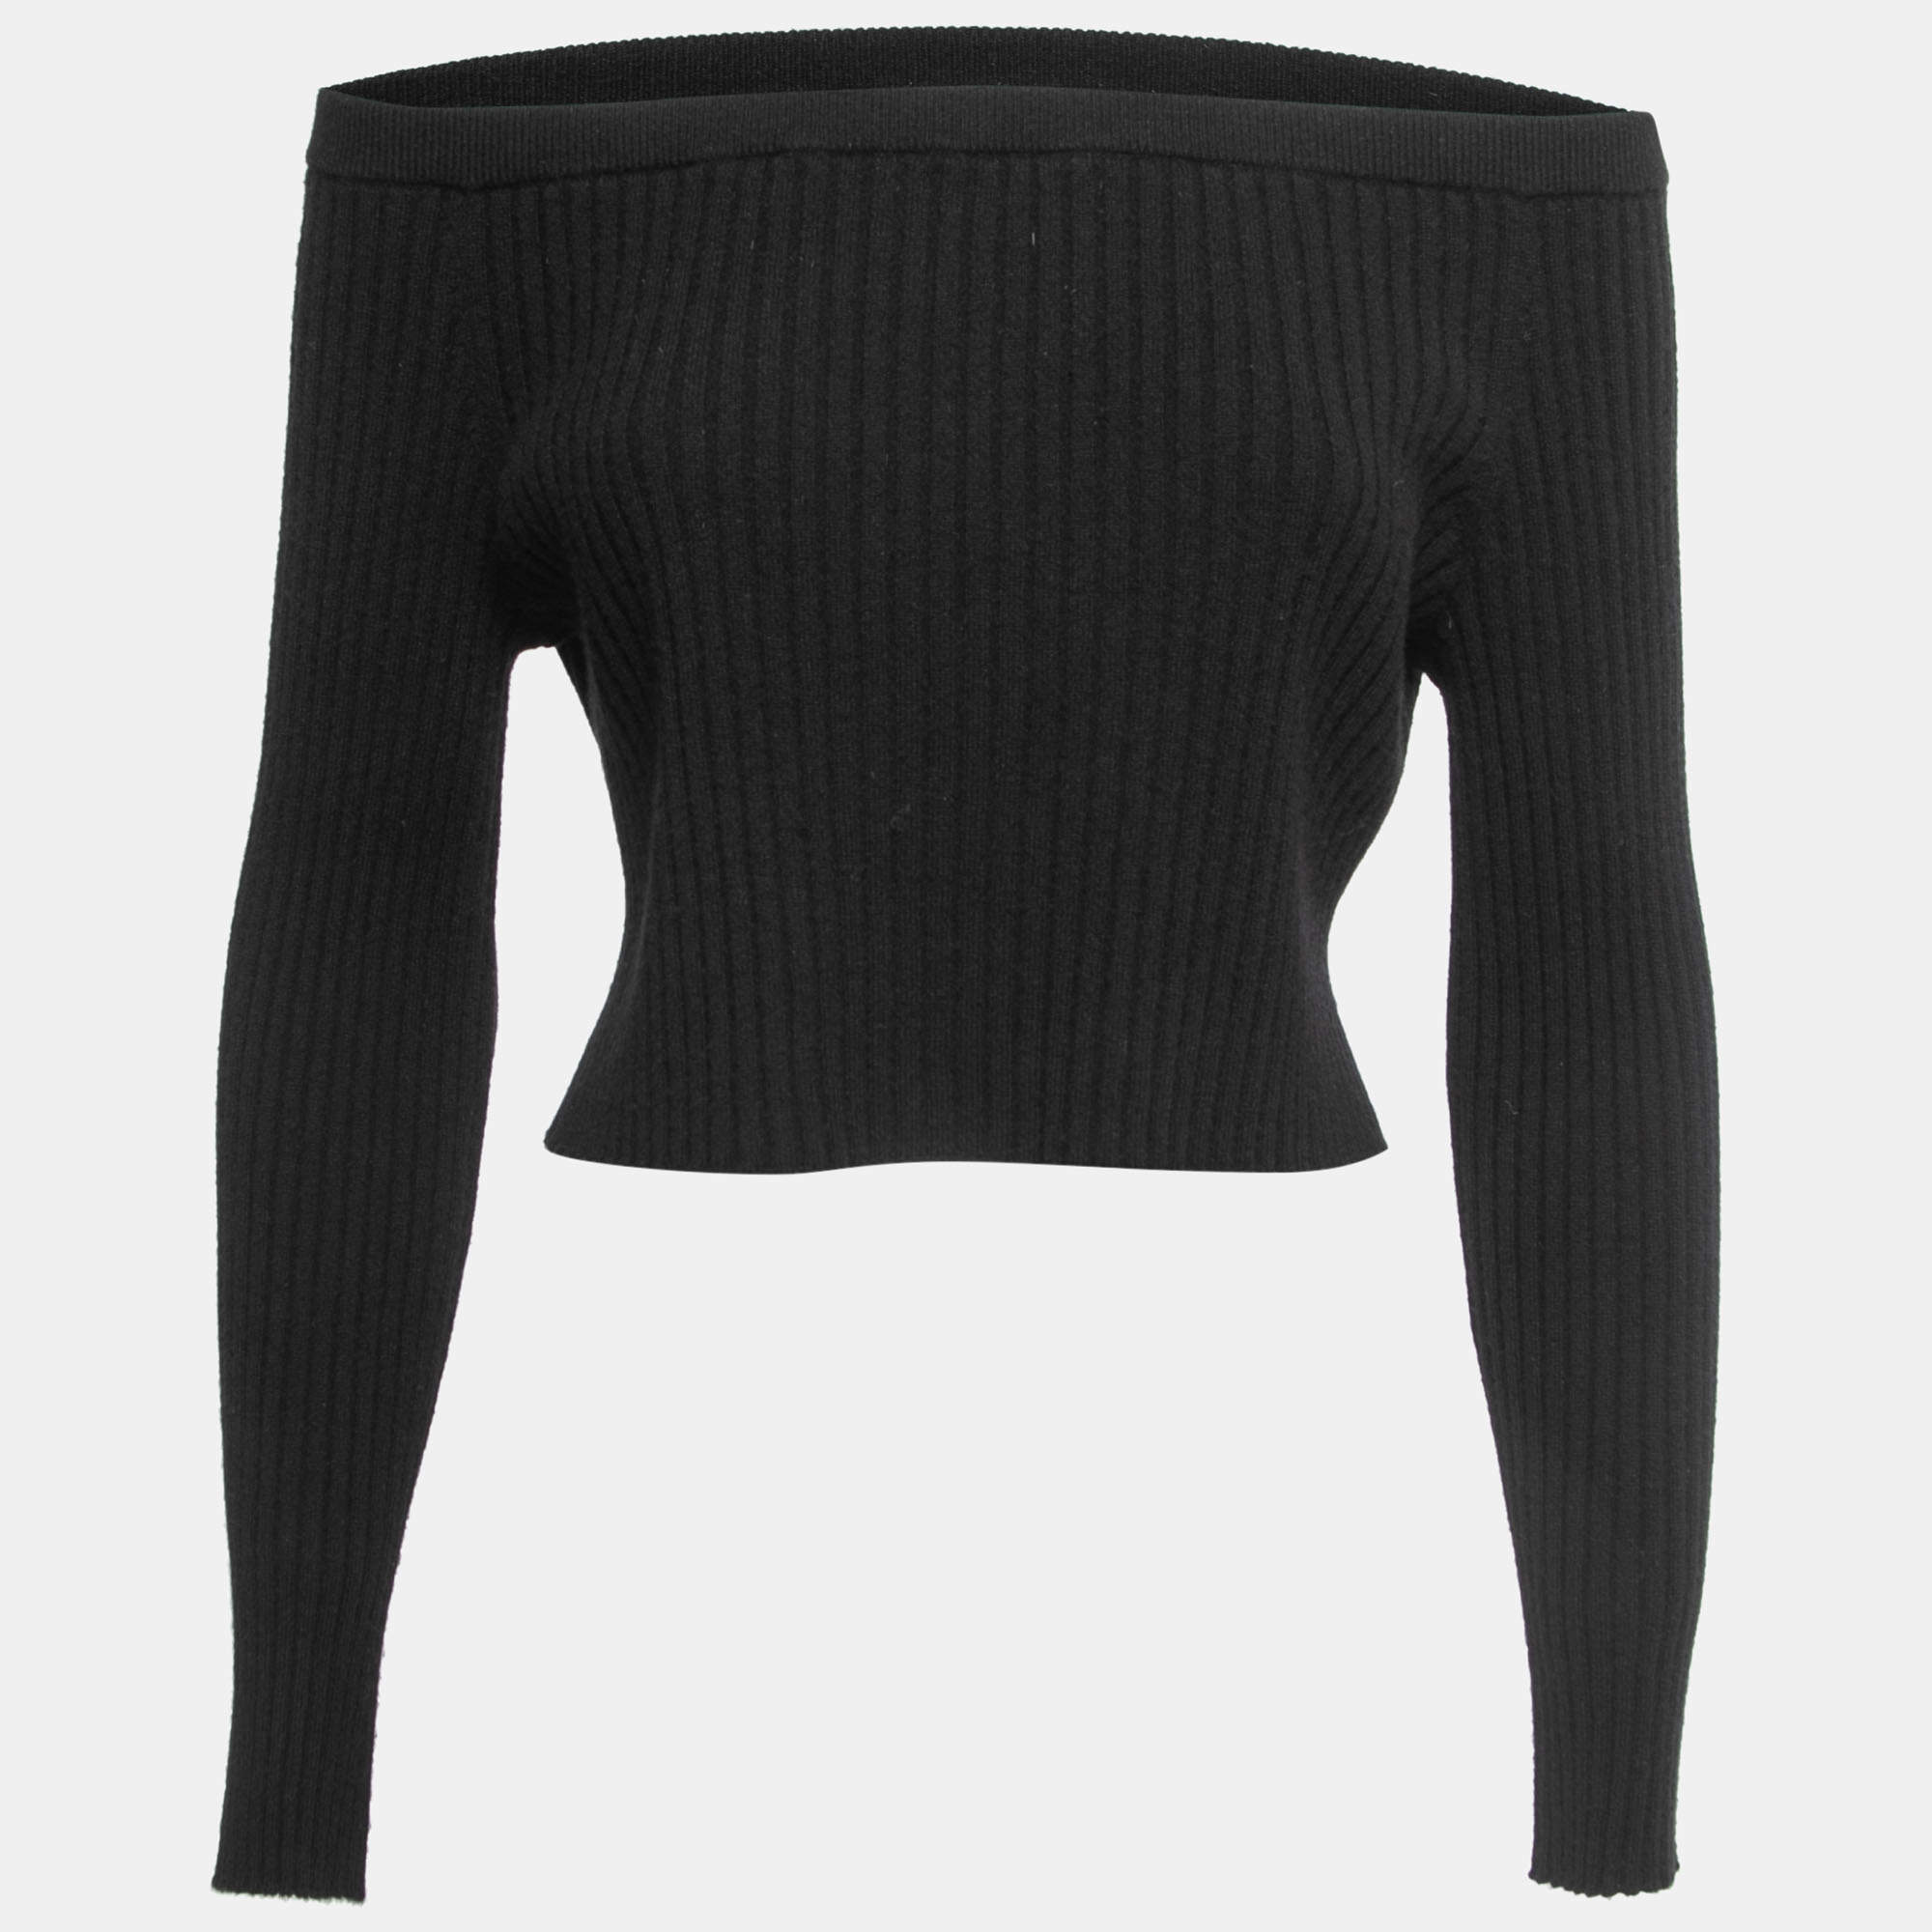 Sablyn Black Cashmere Off-Shoulder Cropped Sweater Top XS